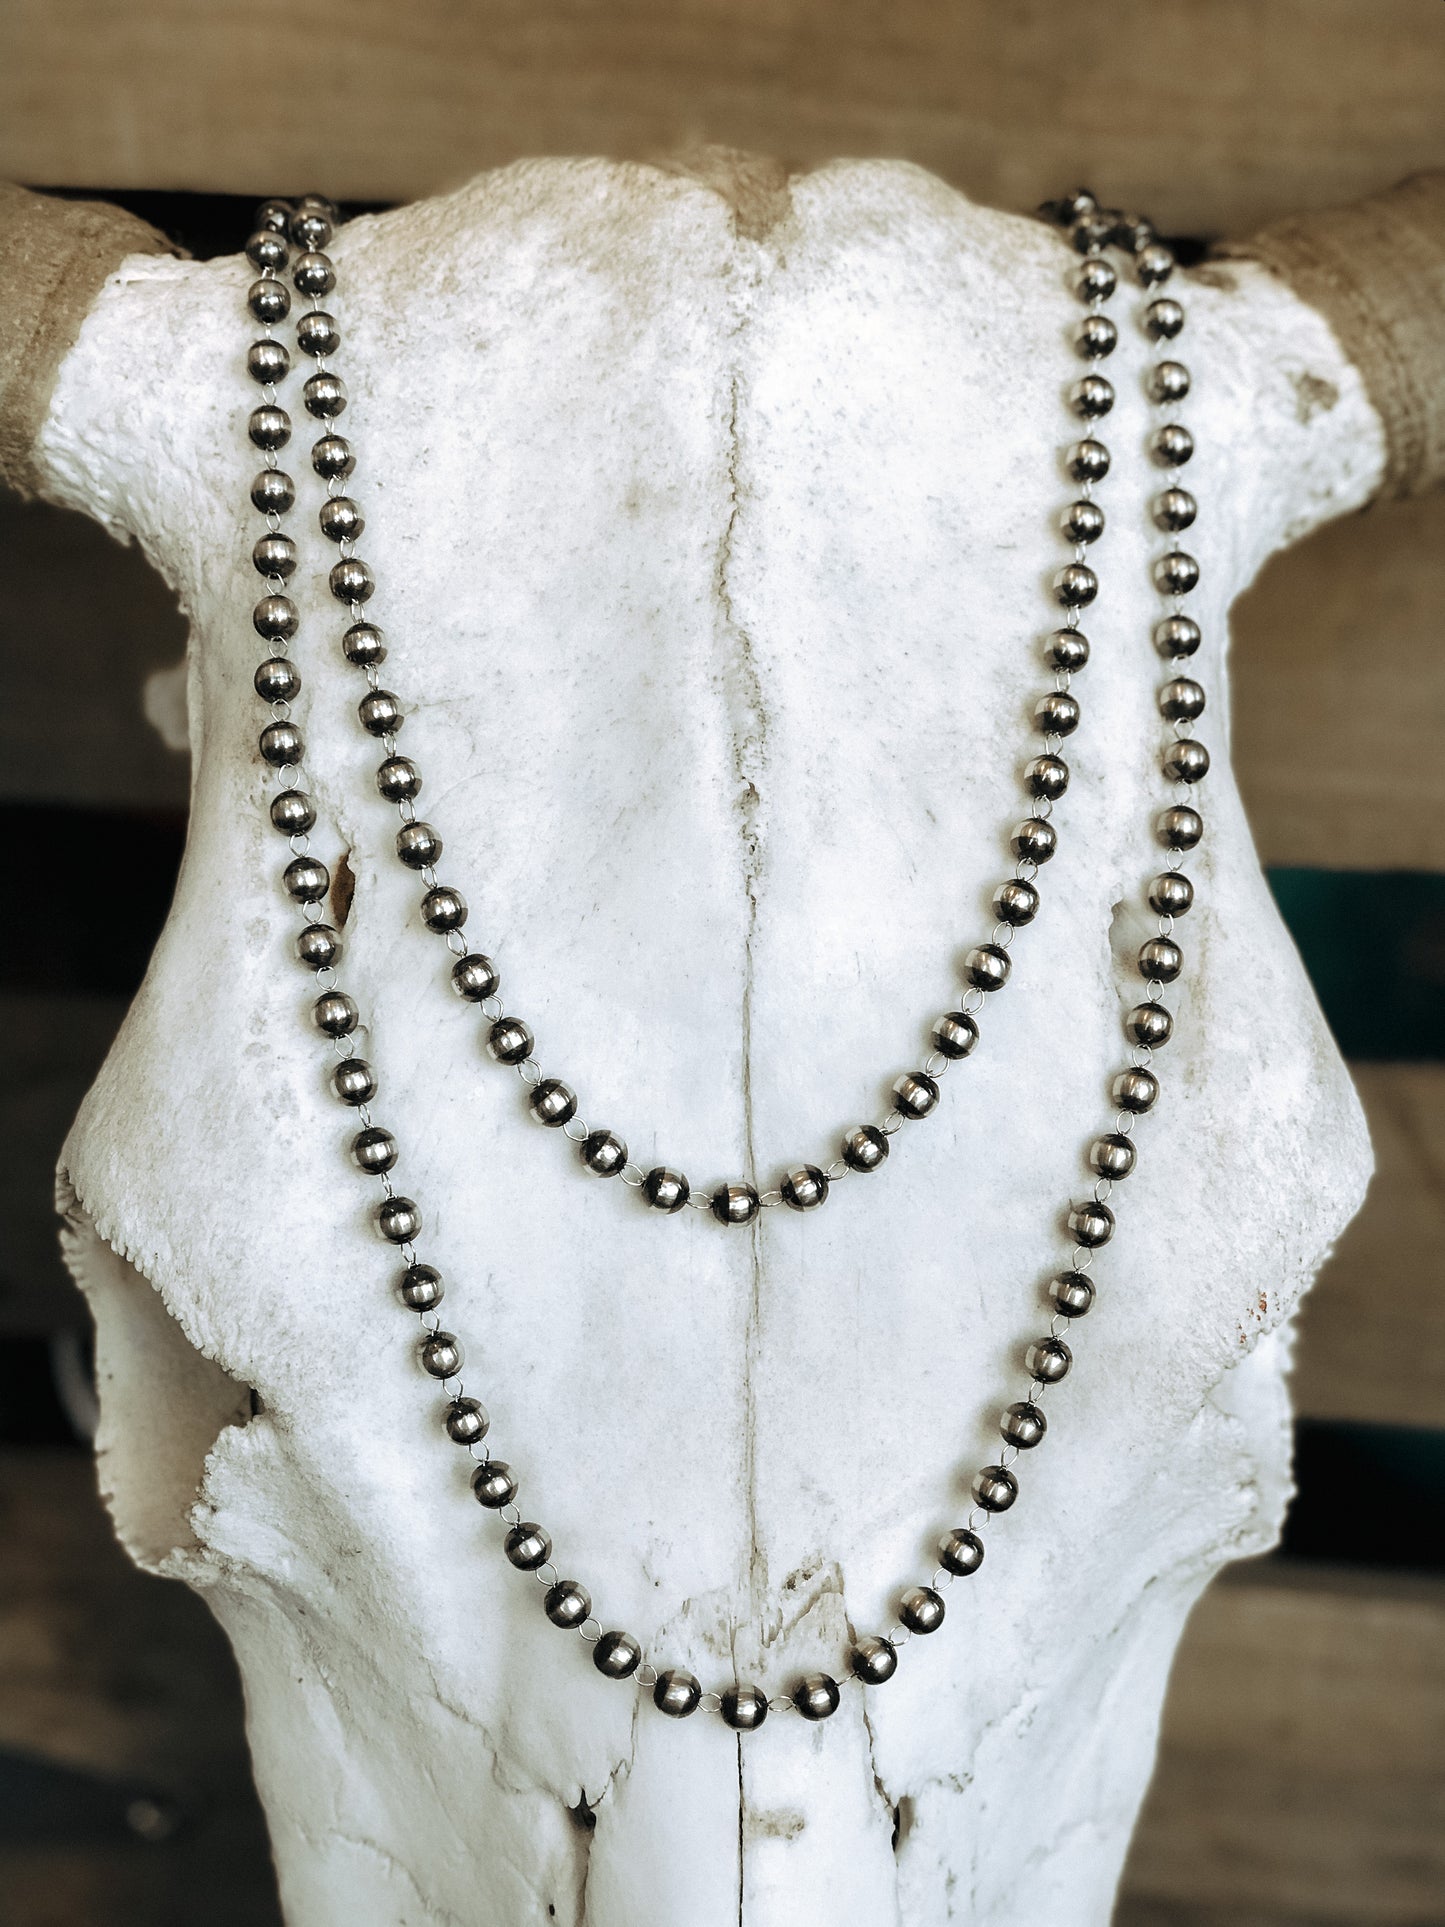 The Rosary Pearls